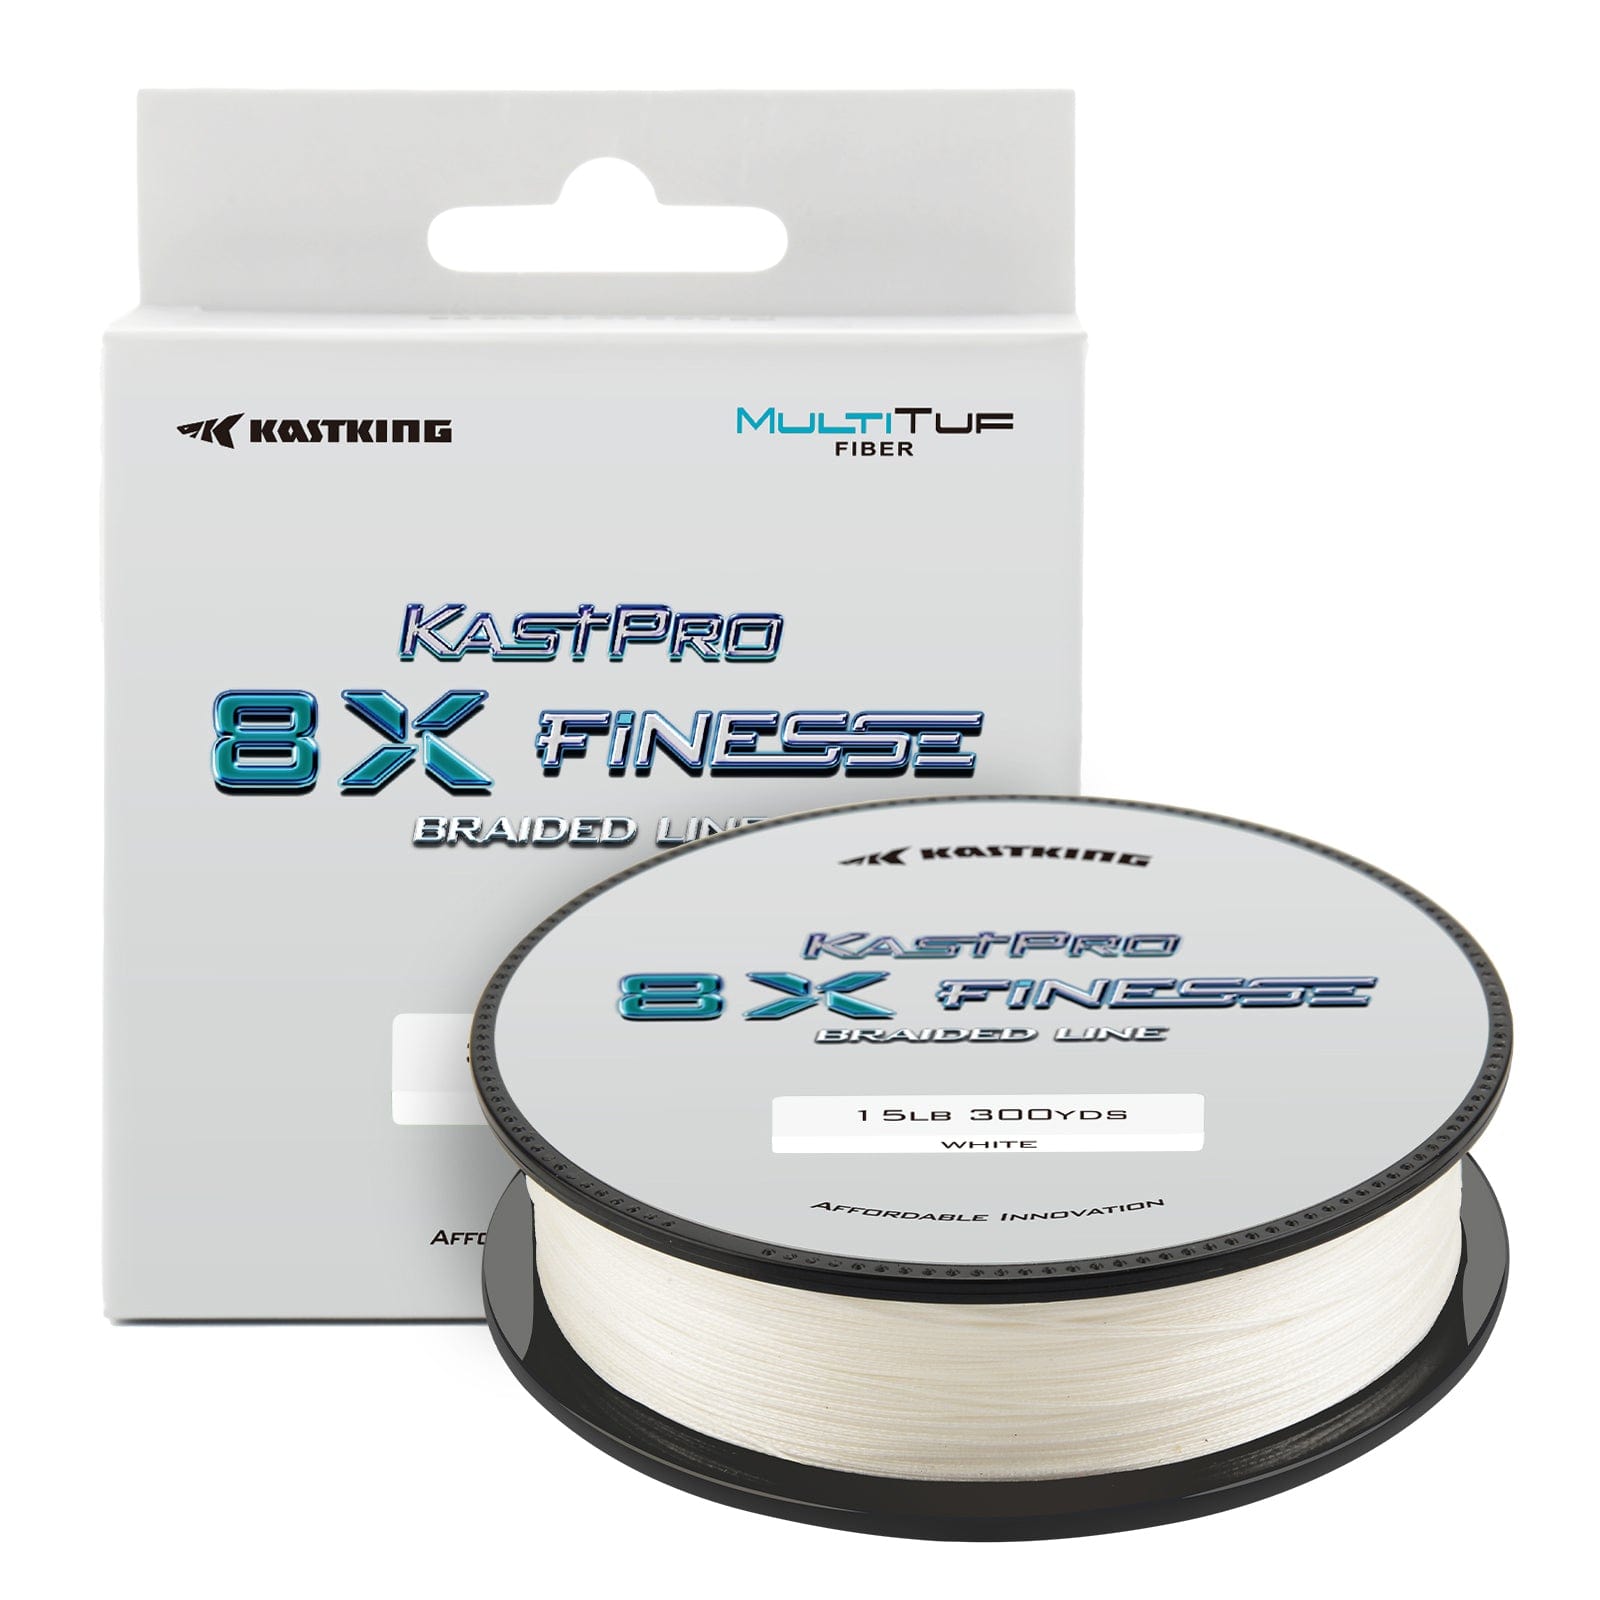 White Braided Fishing Lines & Leaders 20 lb Line Weight Fishing